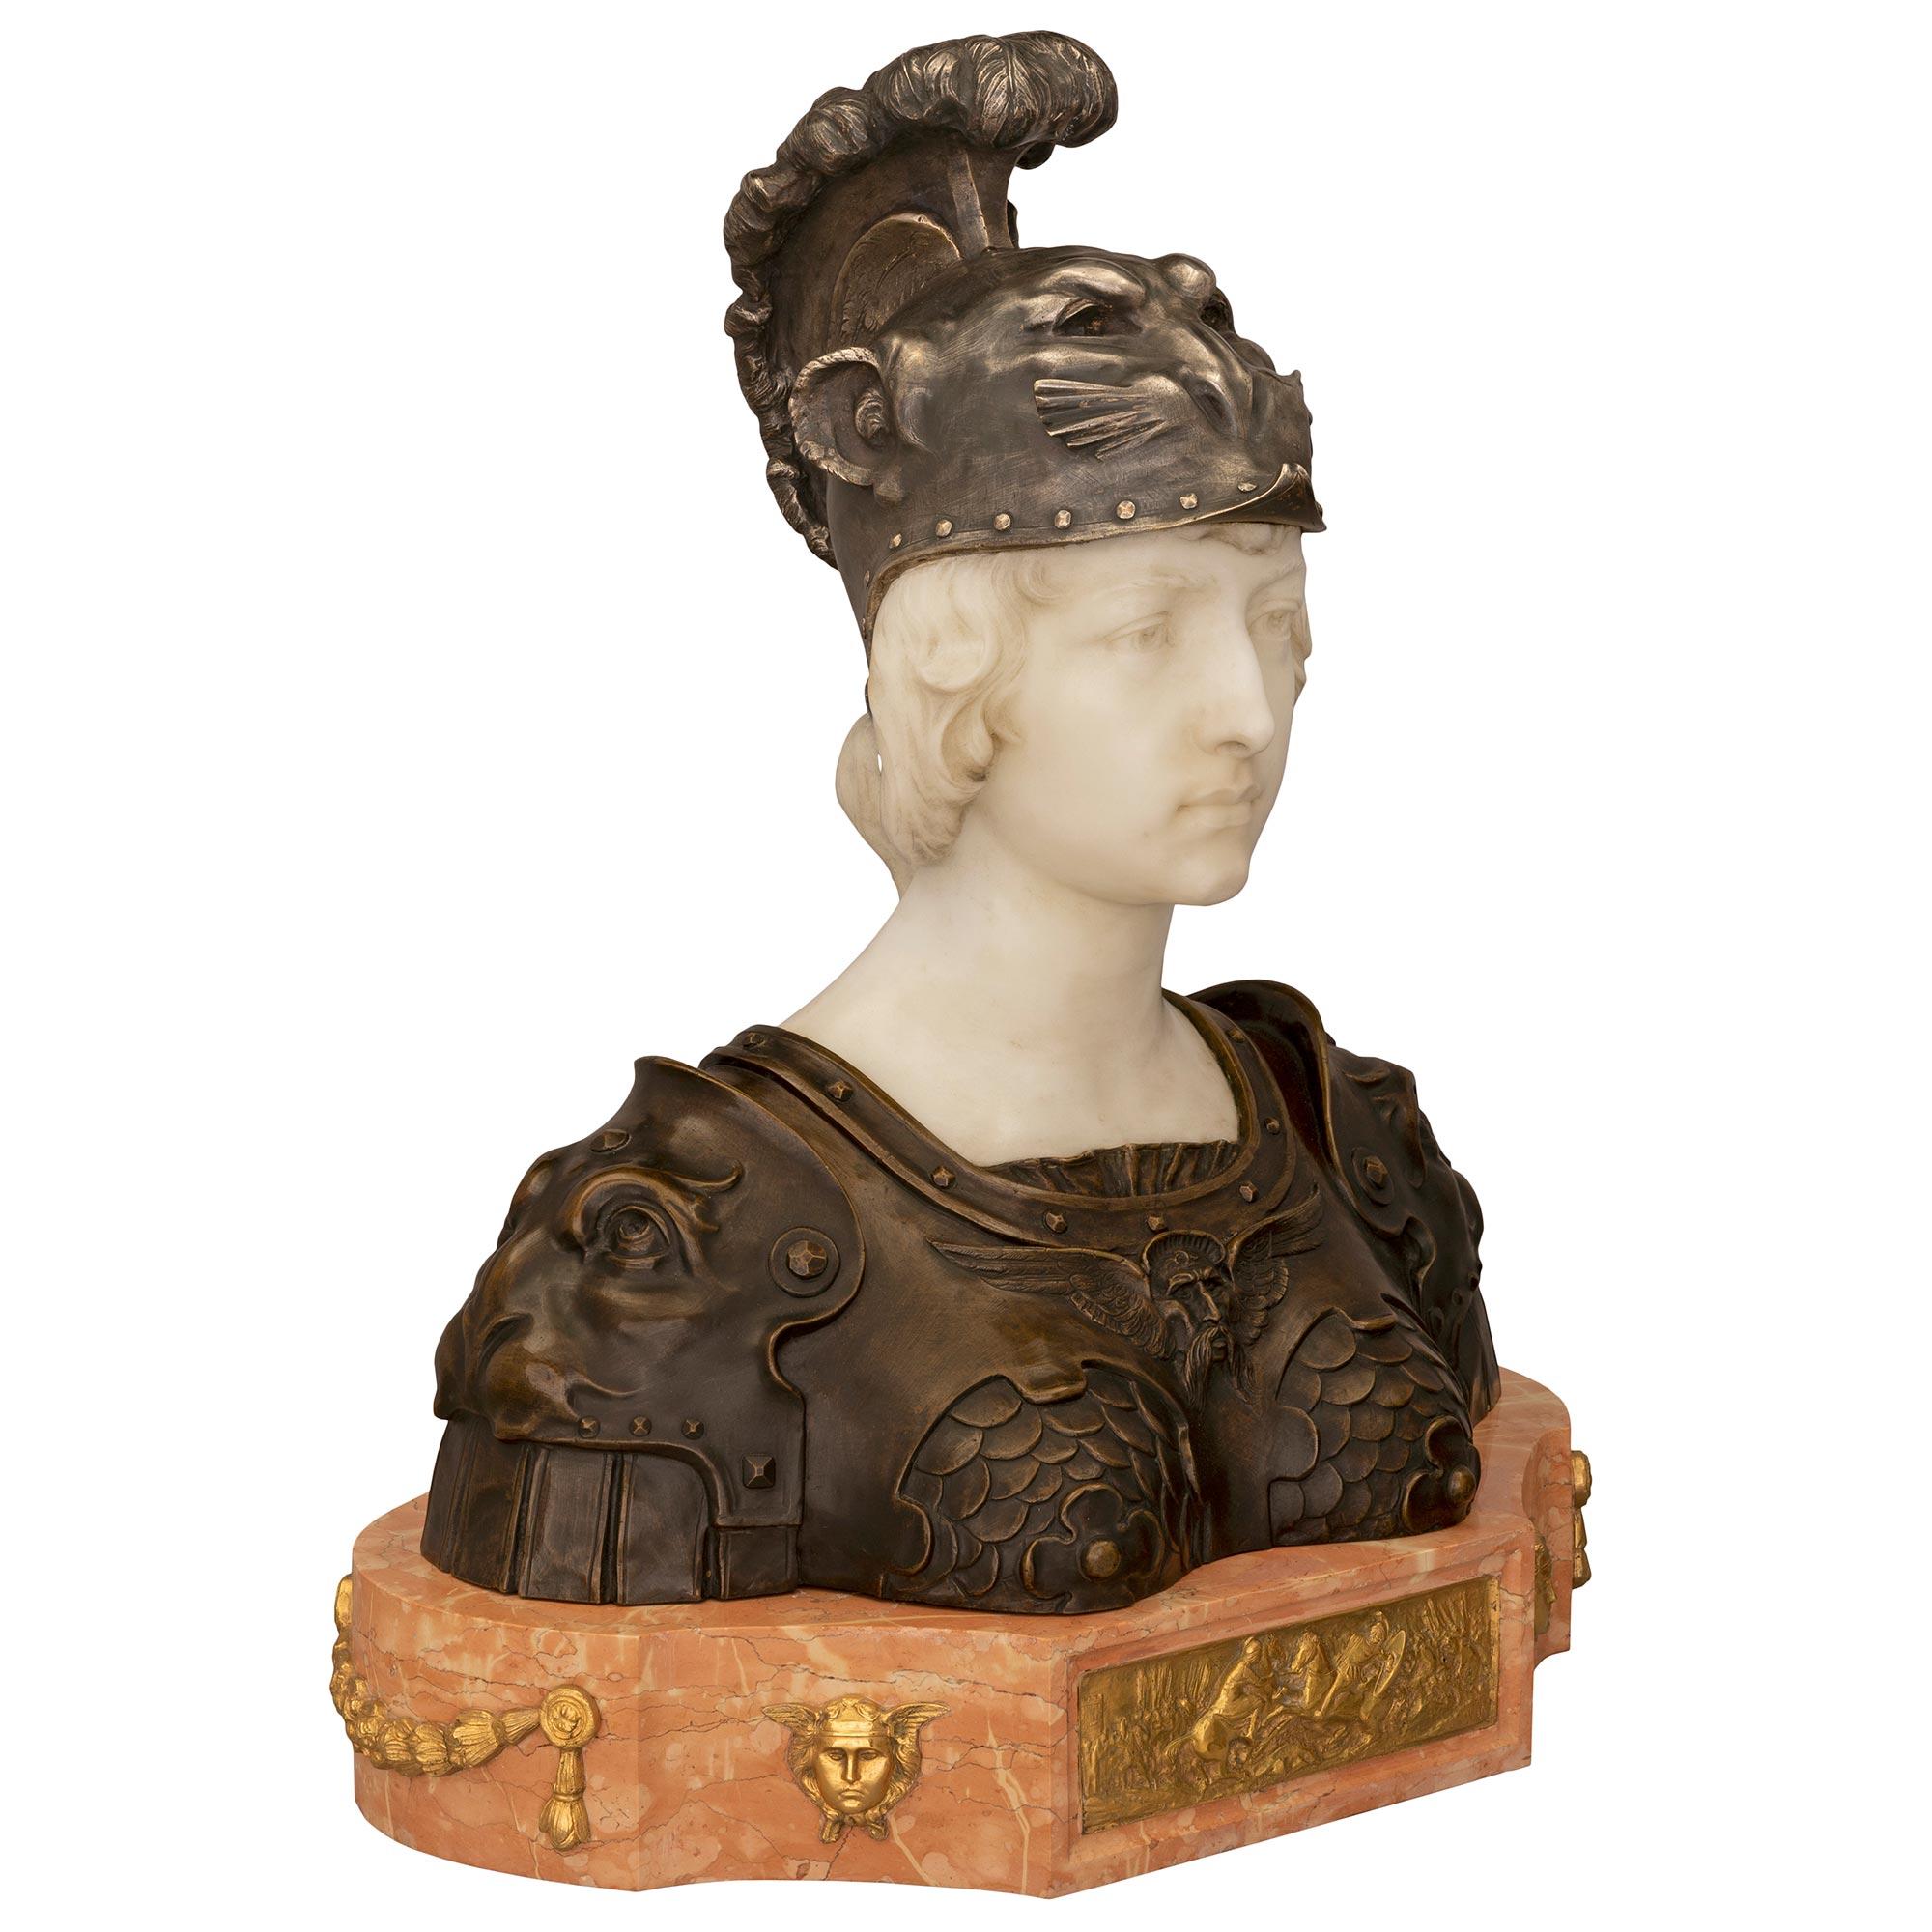 A stunning and most impressive French 19th century Neo-Classical st. patinated bronze, silvered bronze, ormolu, Rosso Verona and white Carrara marble bust of Marianne in full armor. The bust is raised by a thick Rosso Verona marble base with an